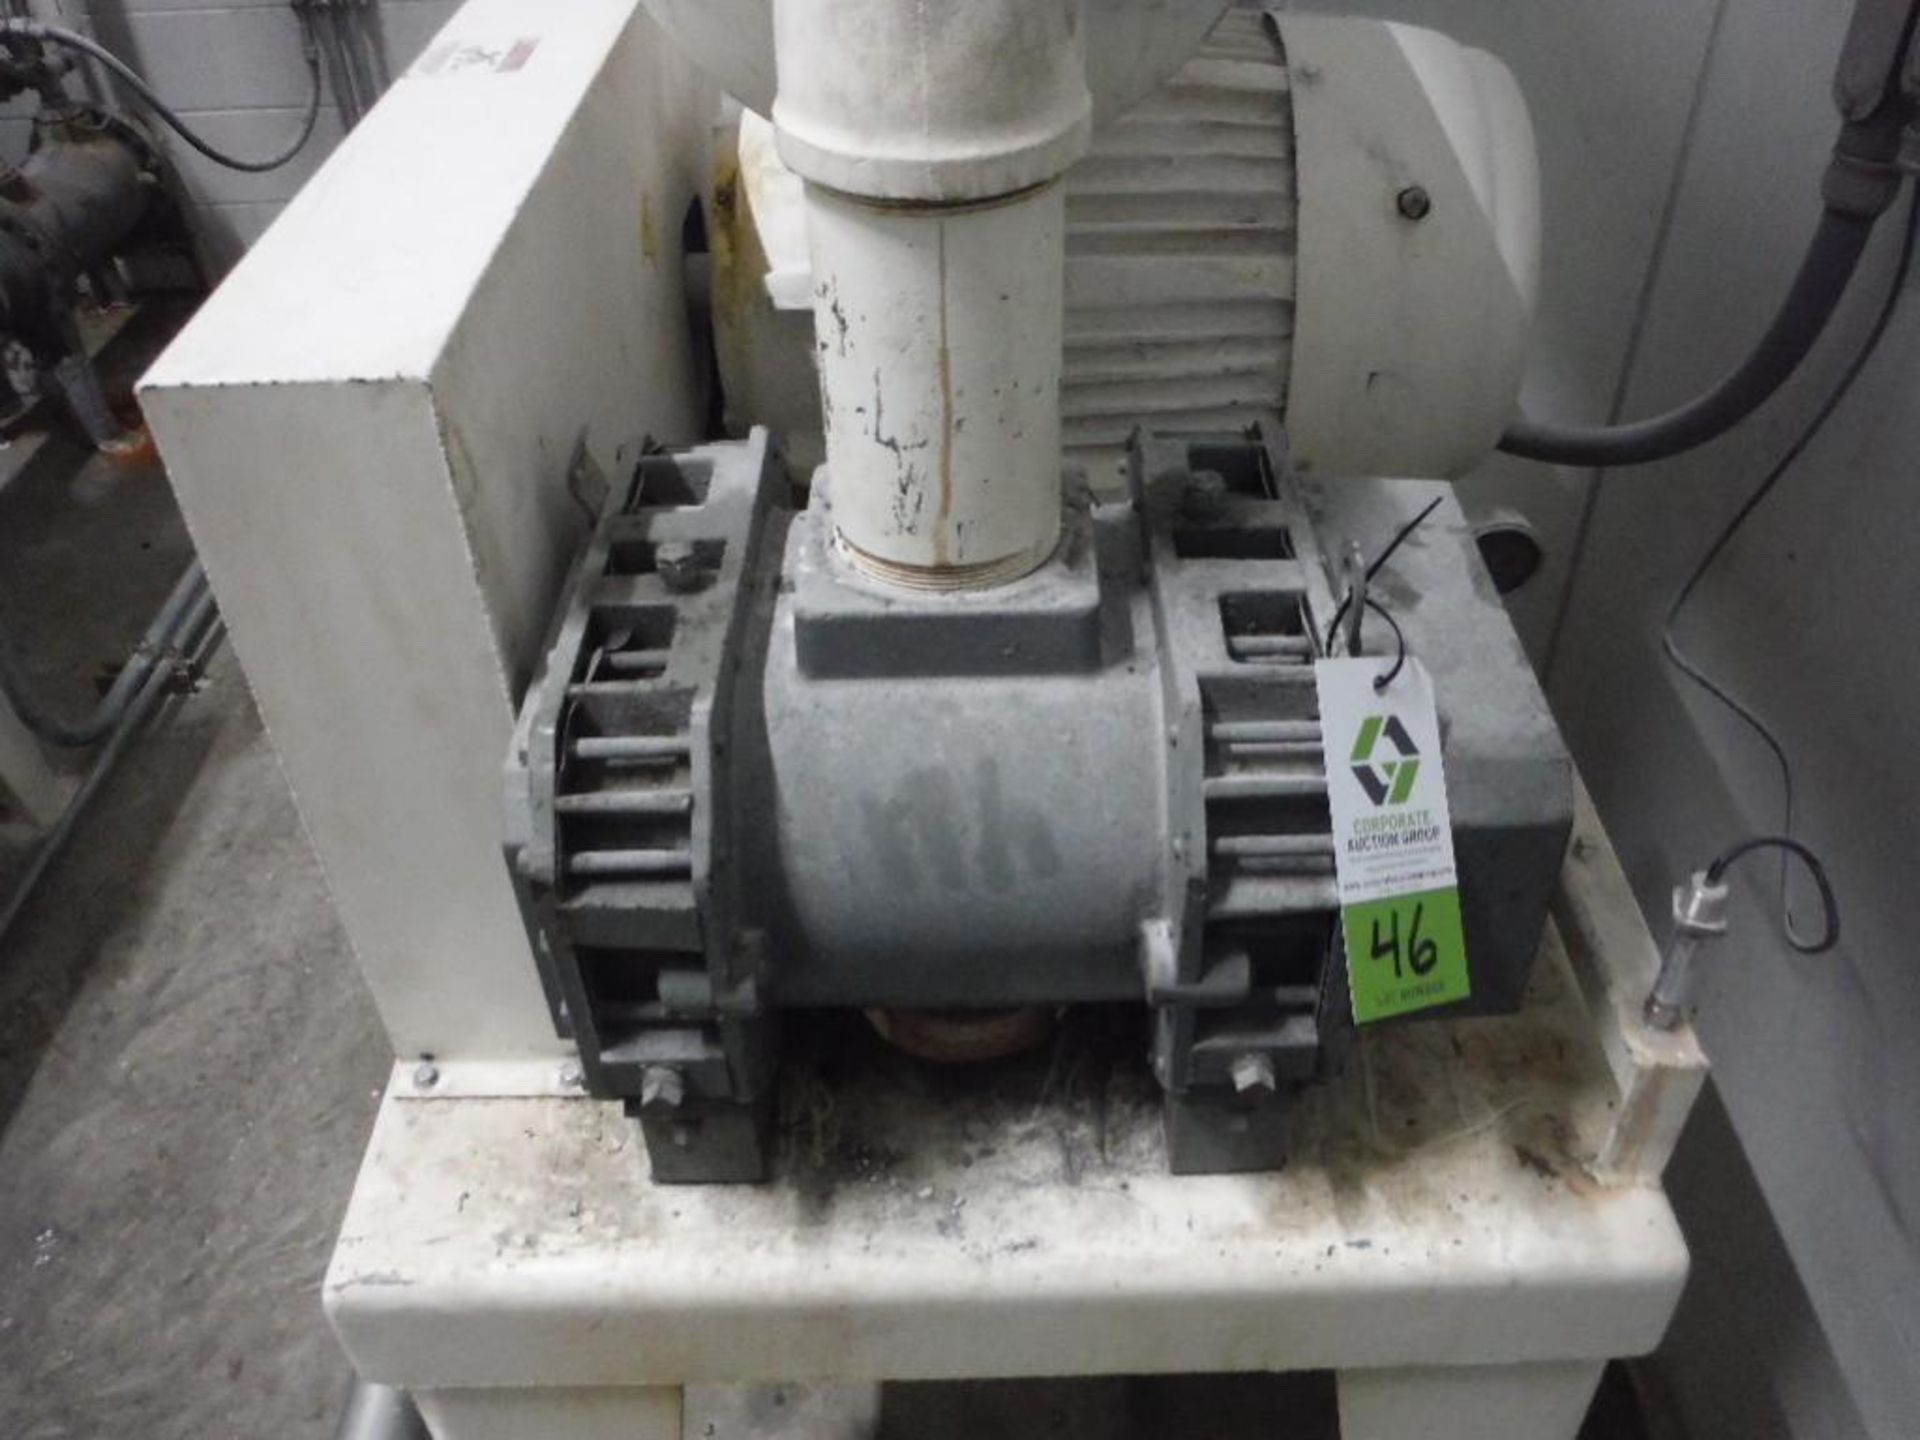 Shick rotary lobe blower, Model 96 G 91711, 50 hp - Rigging Fee: $300 - Image 2 of 7